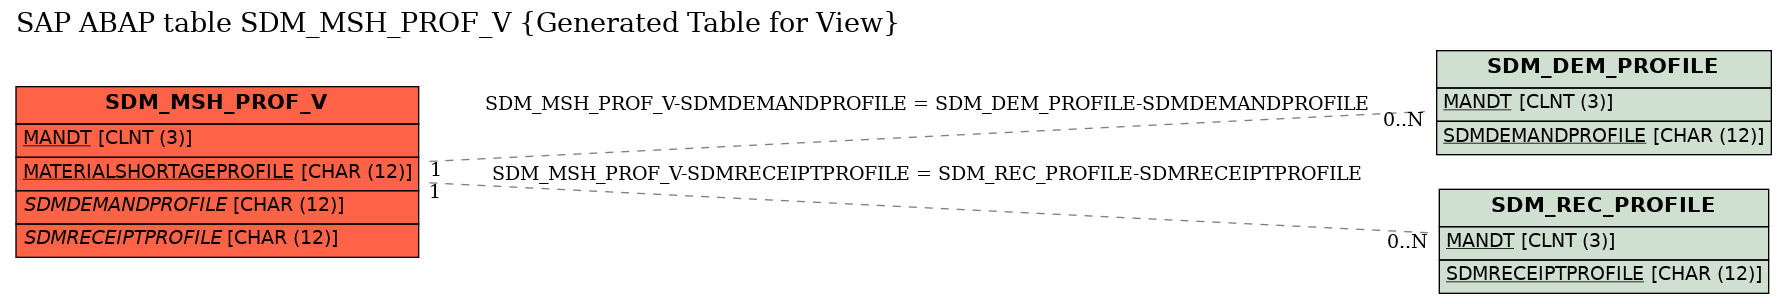 E-R Diagram for table SDM_MSH_PROF_V (Generated Table for View)